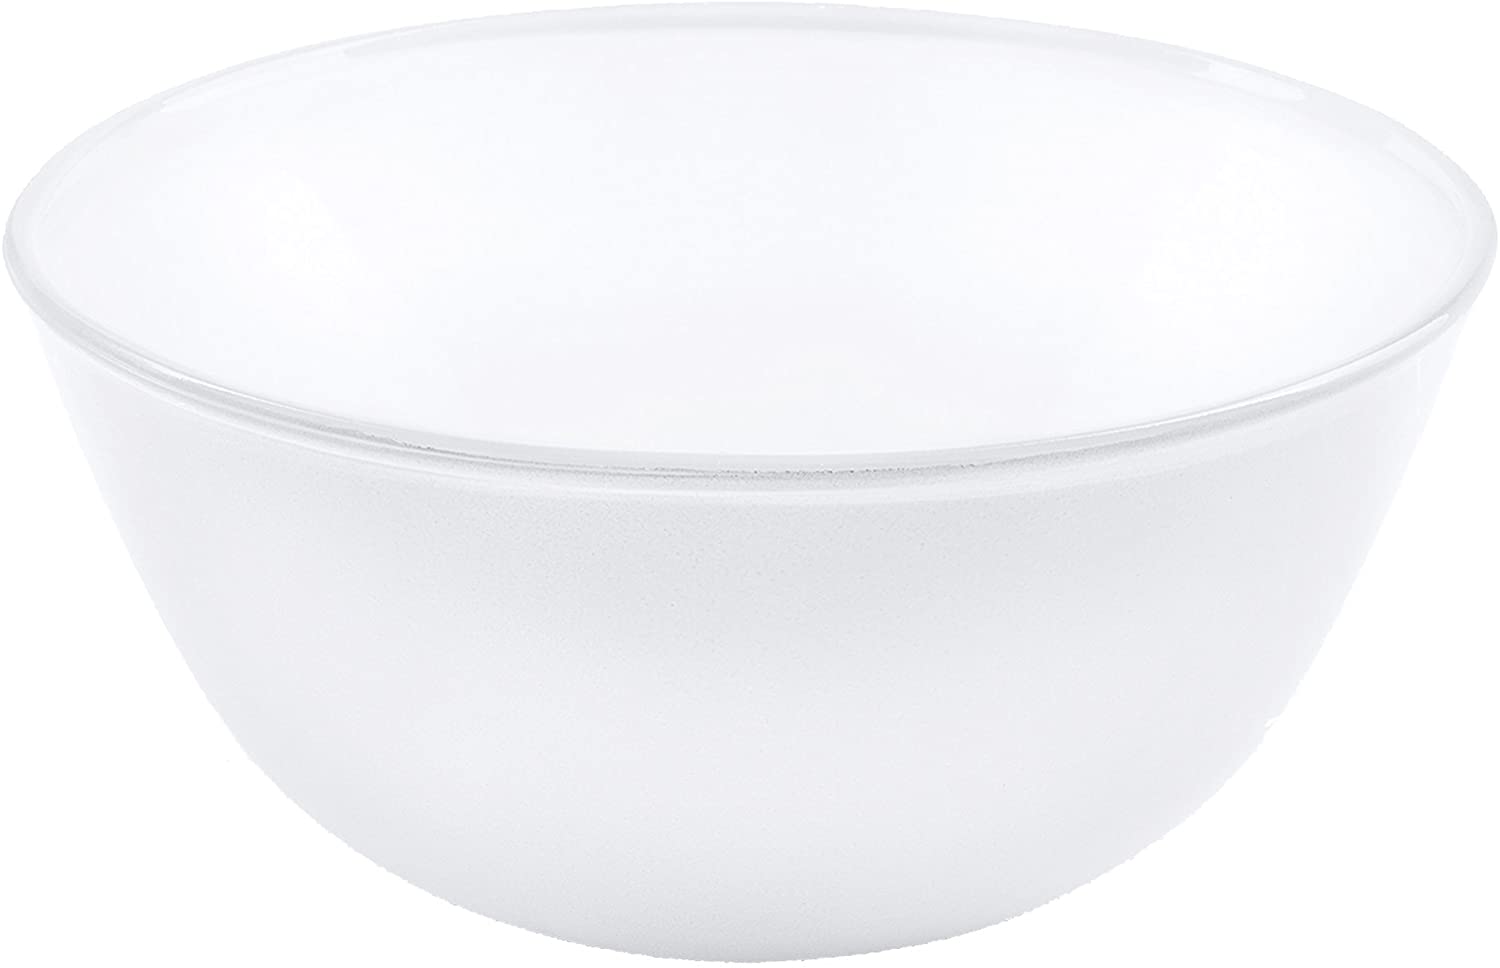 Bohemia Cristal Play of colors Cooking Bowl Approx. 3.5 Ltr White Made of Borosilicate Glass, Glass Bowl, 12.5 x 10.5 x 12.5 cm